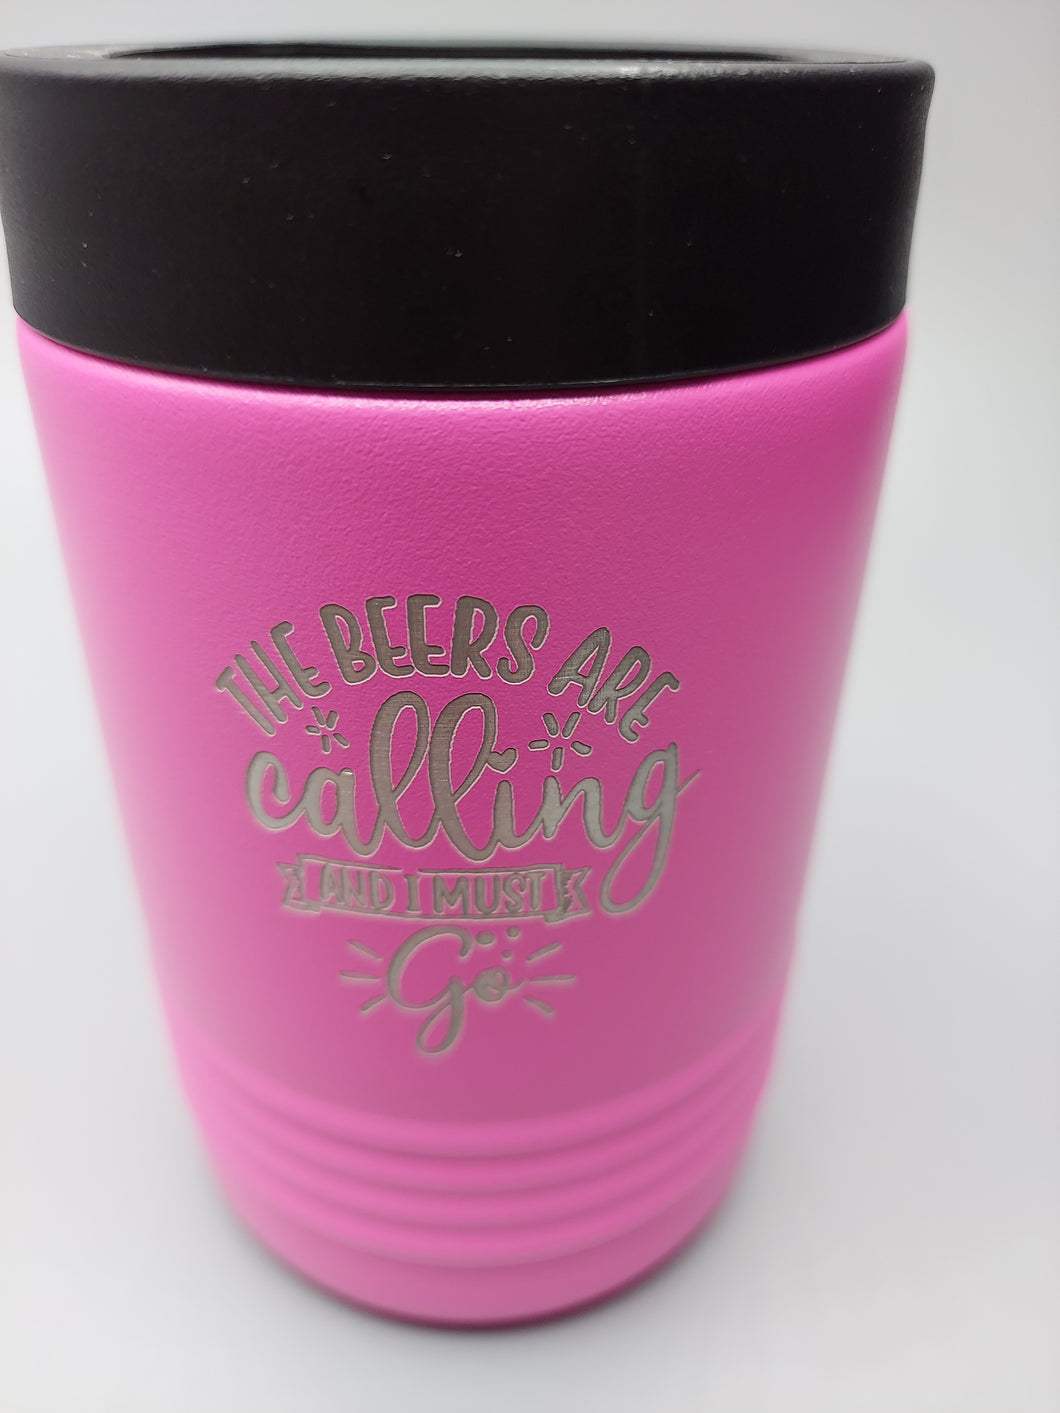 THE BEERS ARE CALLING AND I MUST GO hot pink beverage holder